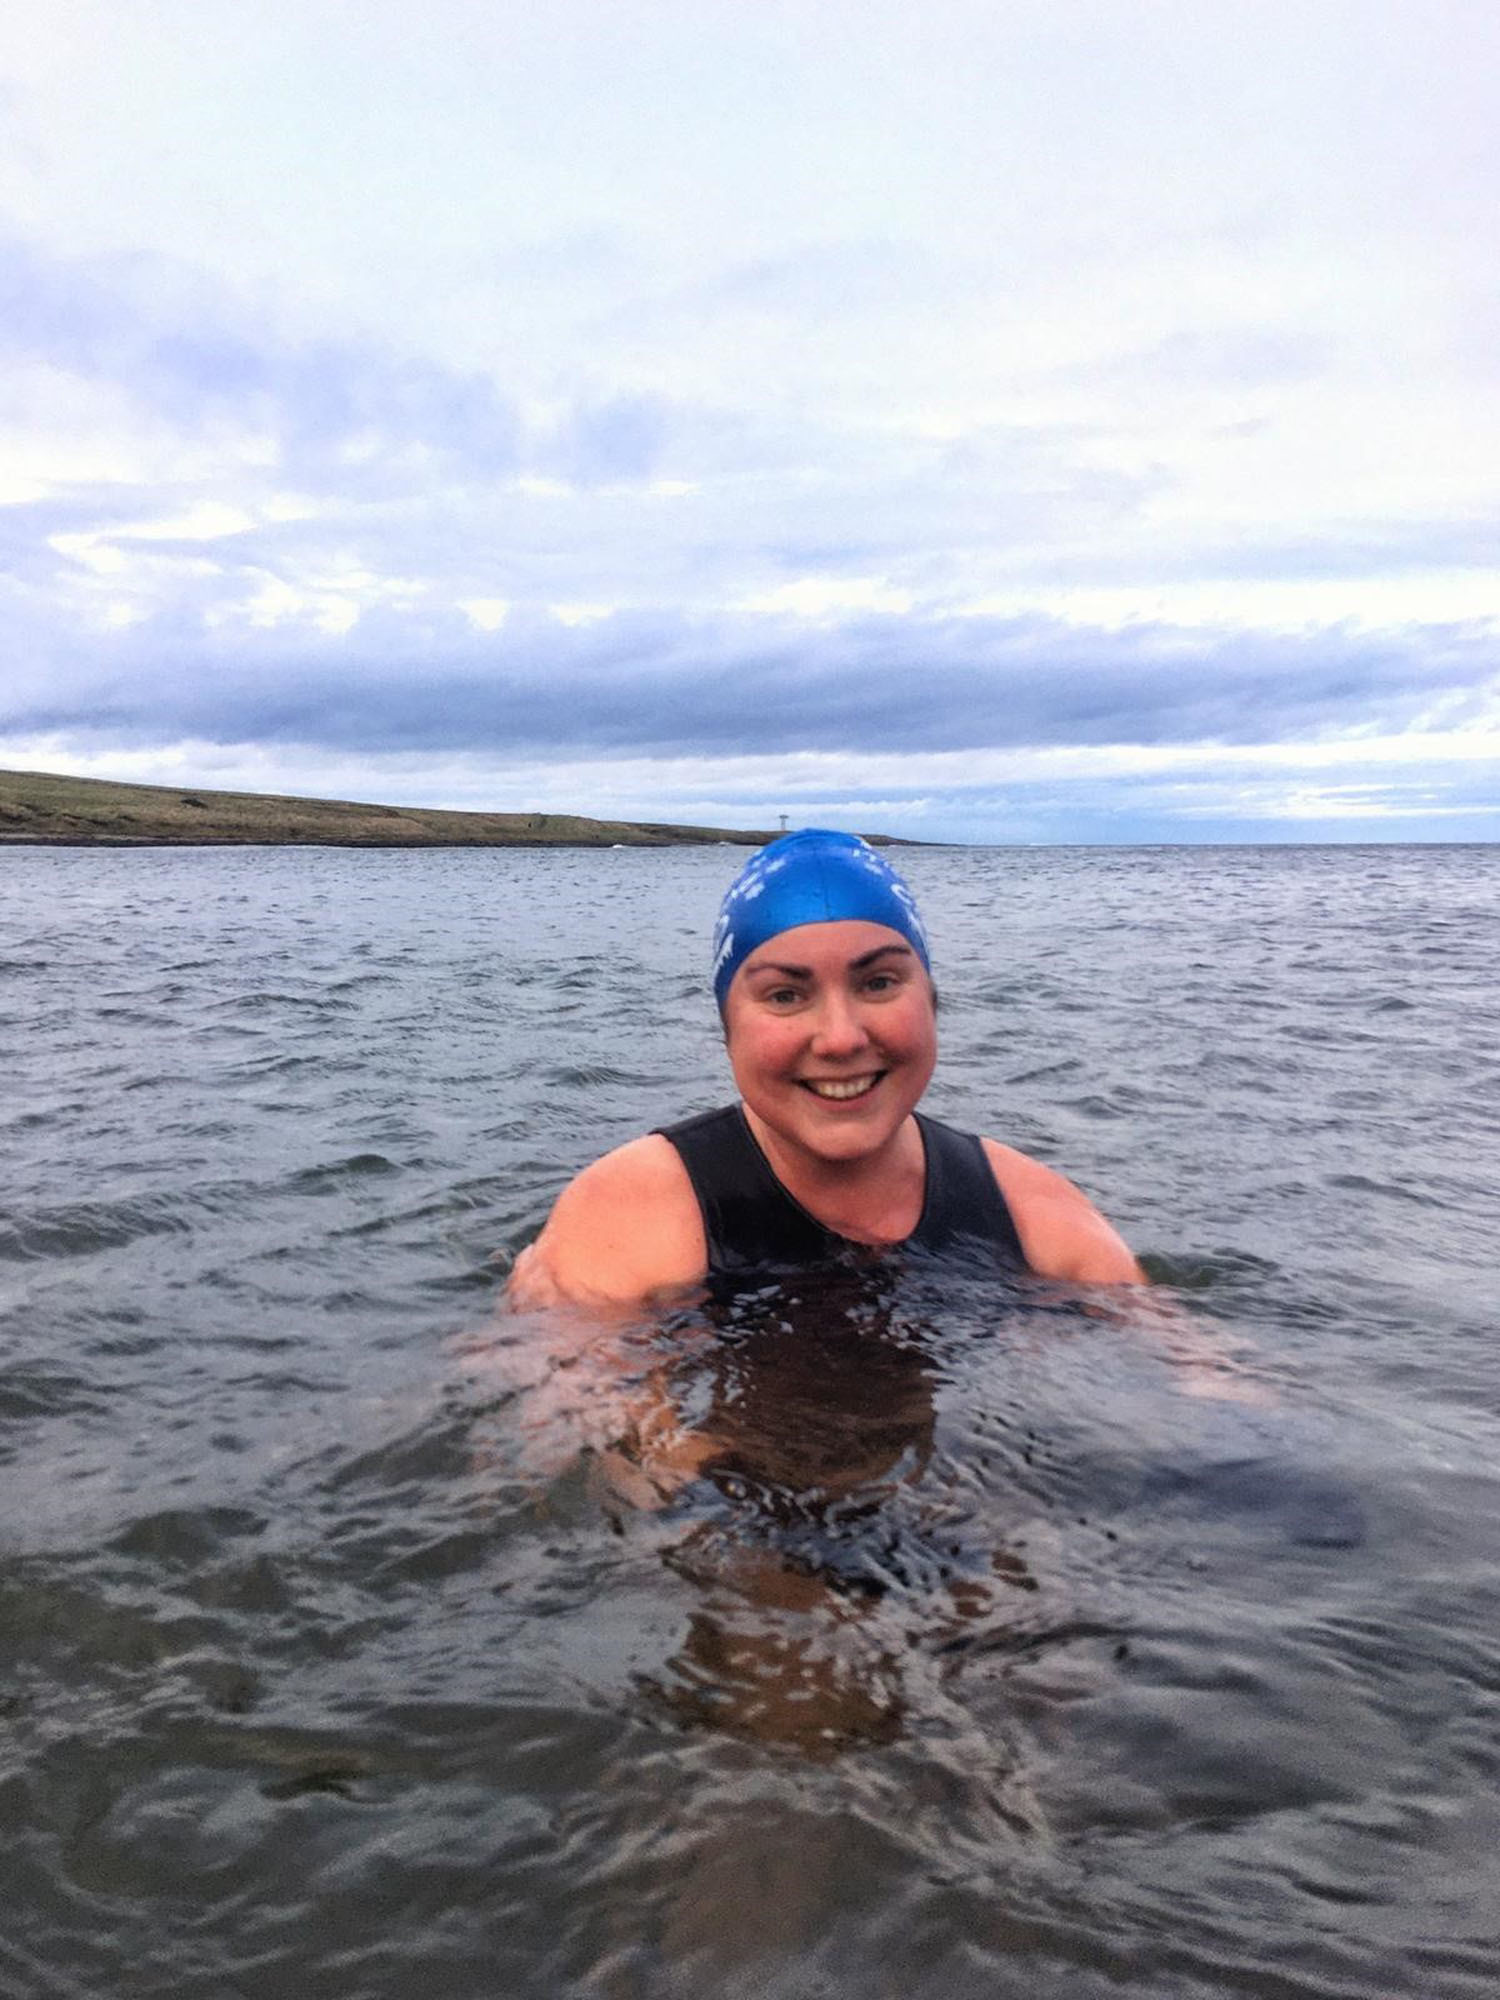 Clare Jones, who suffered a head injury in a freak accident on a swing, will be doing a Dip a Day for a month in the North Sea to raise funds for the Samaritans